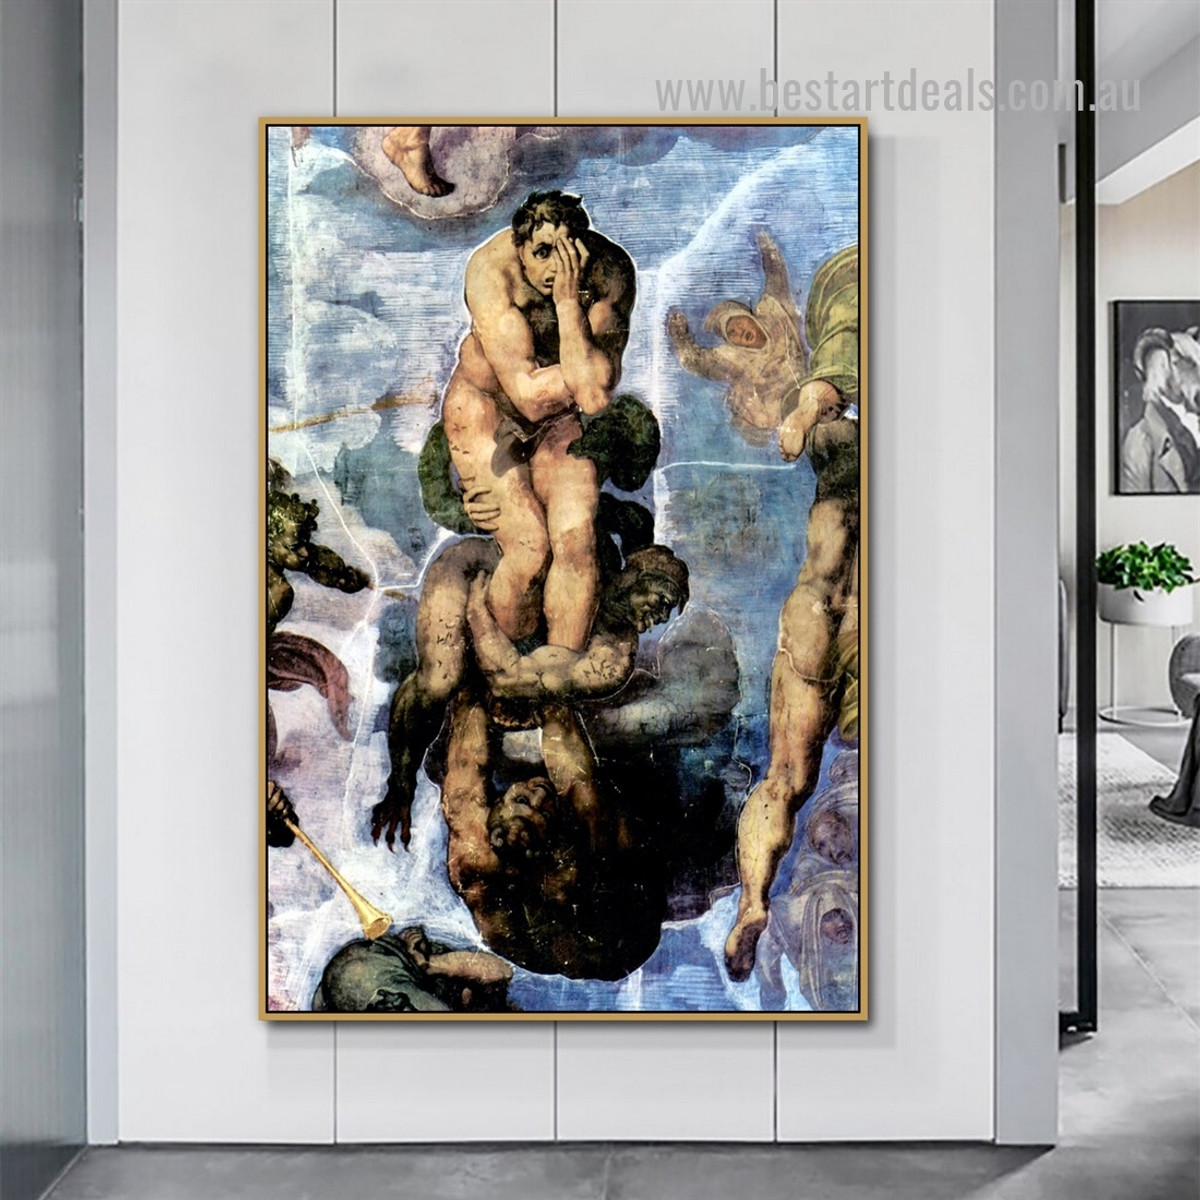 An Angel to Winding Trumpet Michelangelo High Renaissance Nude Reproduction Artwork Picture Canvas Print for Room Wall Garniture